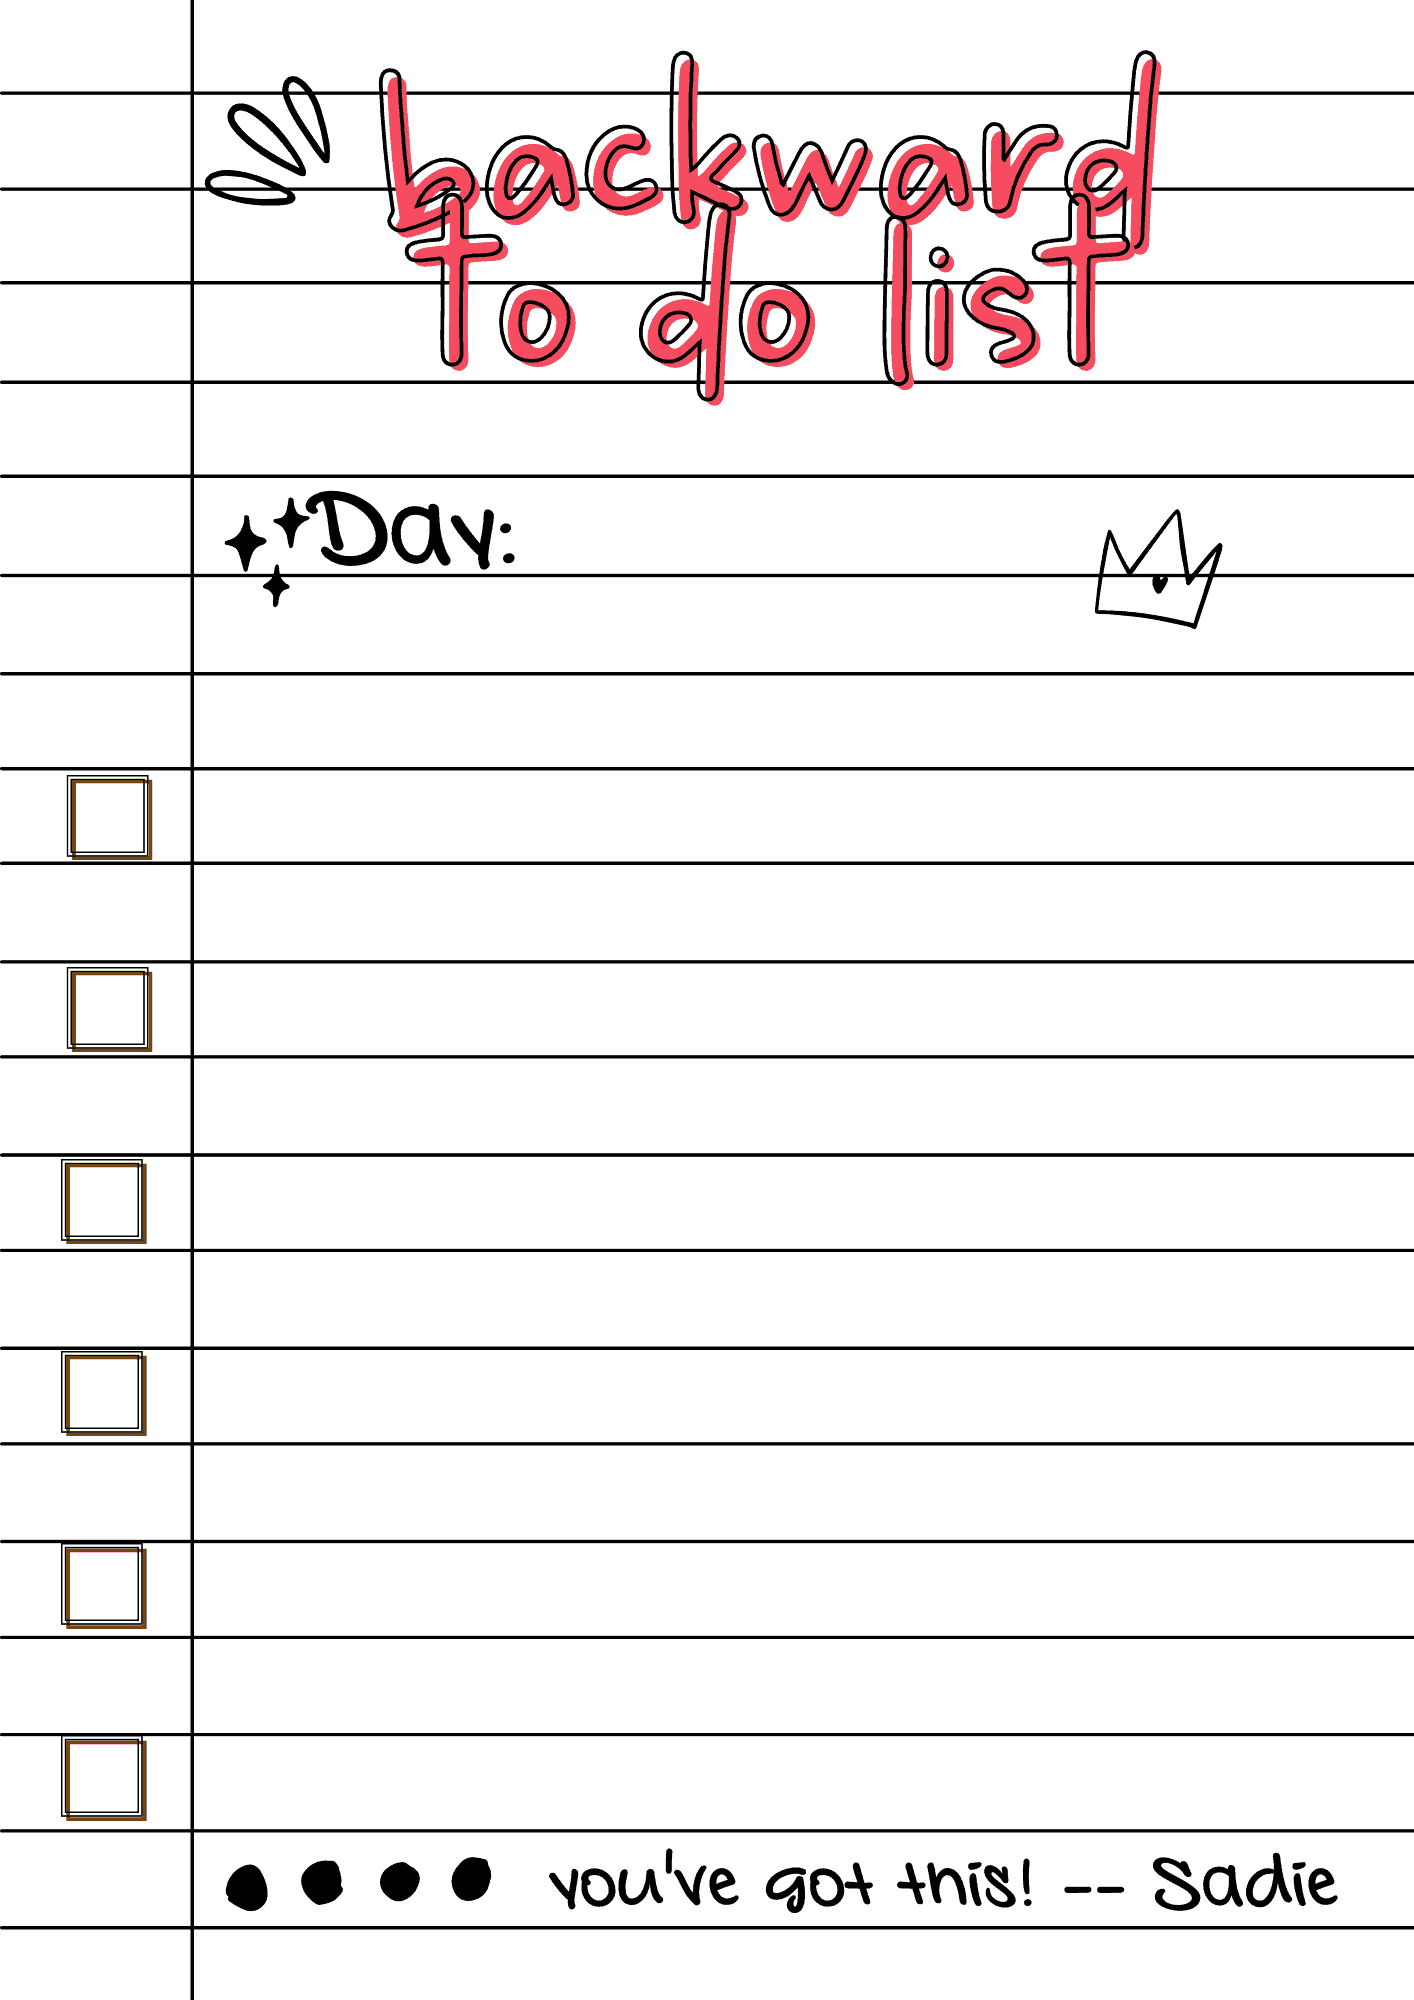 How backward to do lists help me get shit done